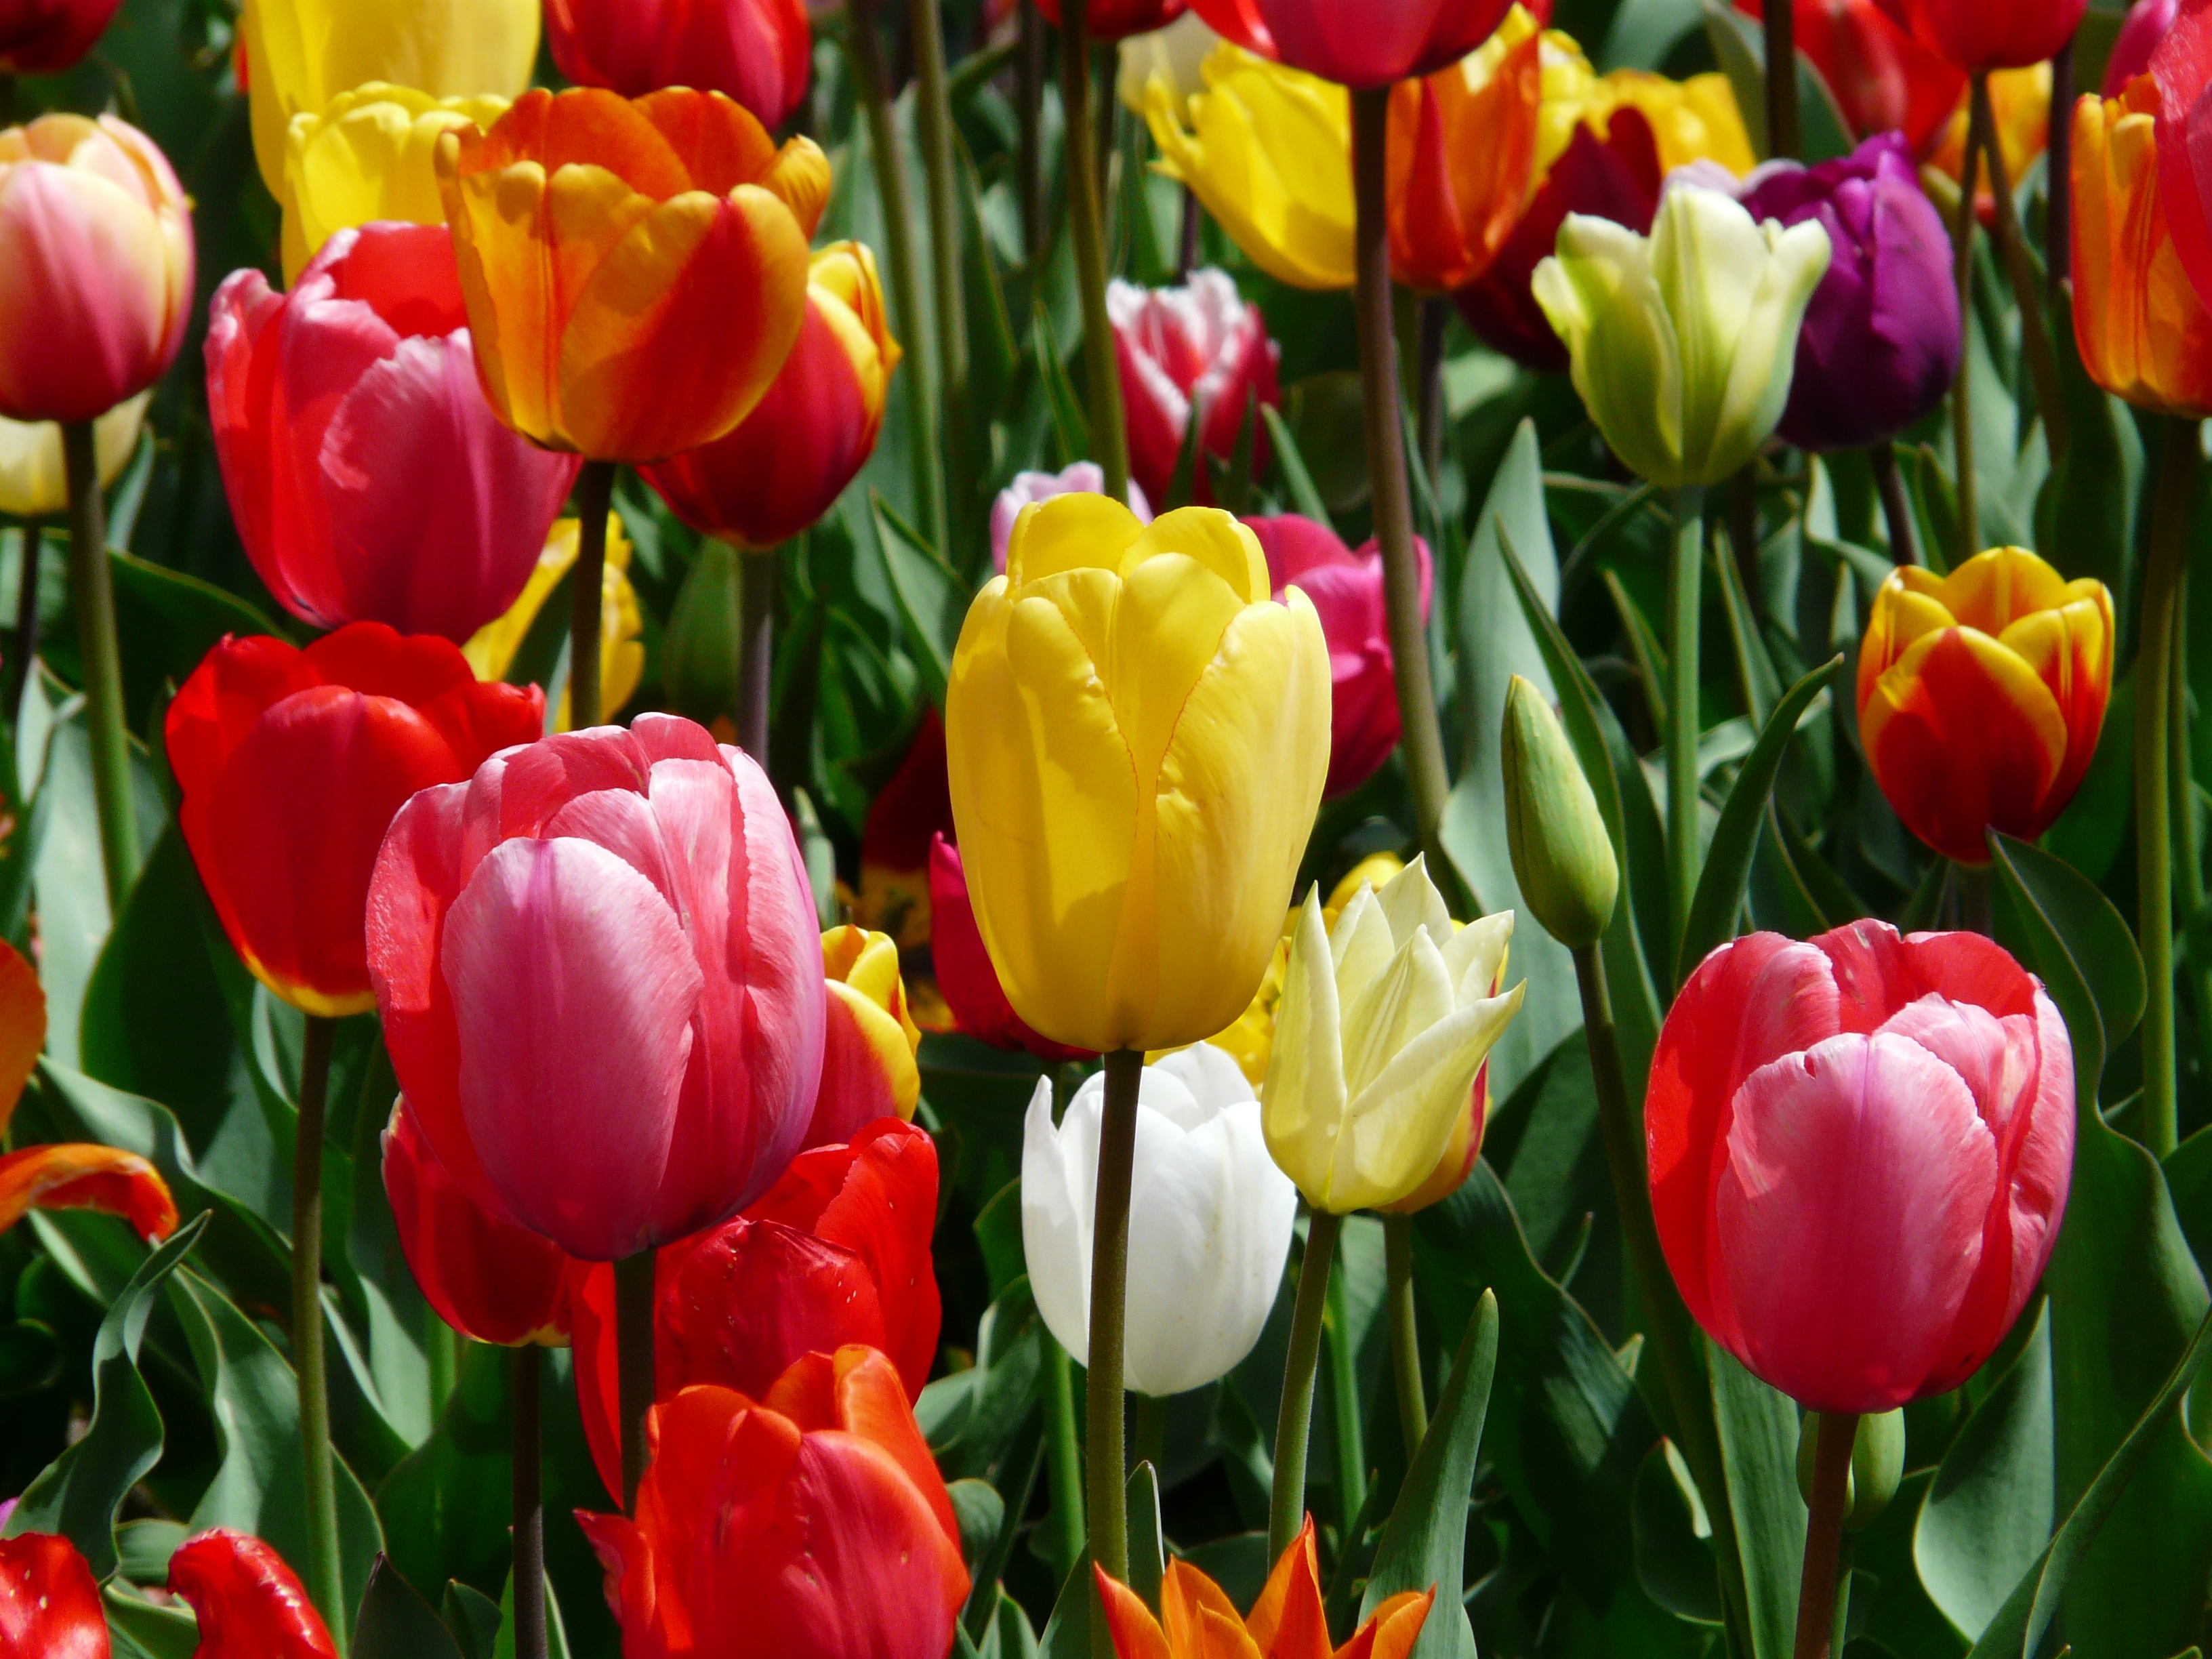 Tulips bloom free image download